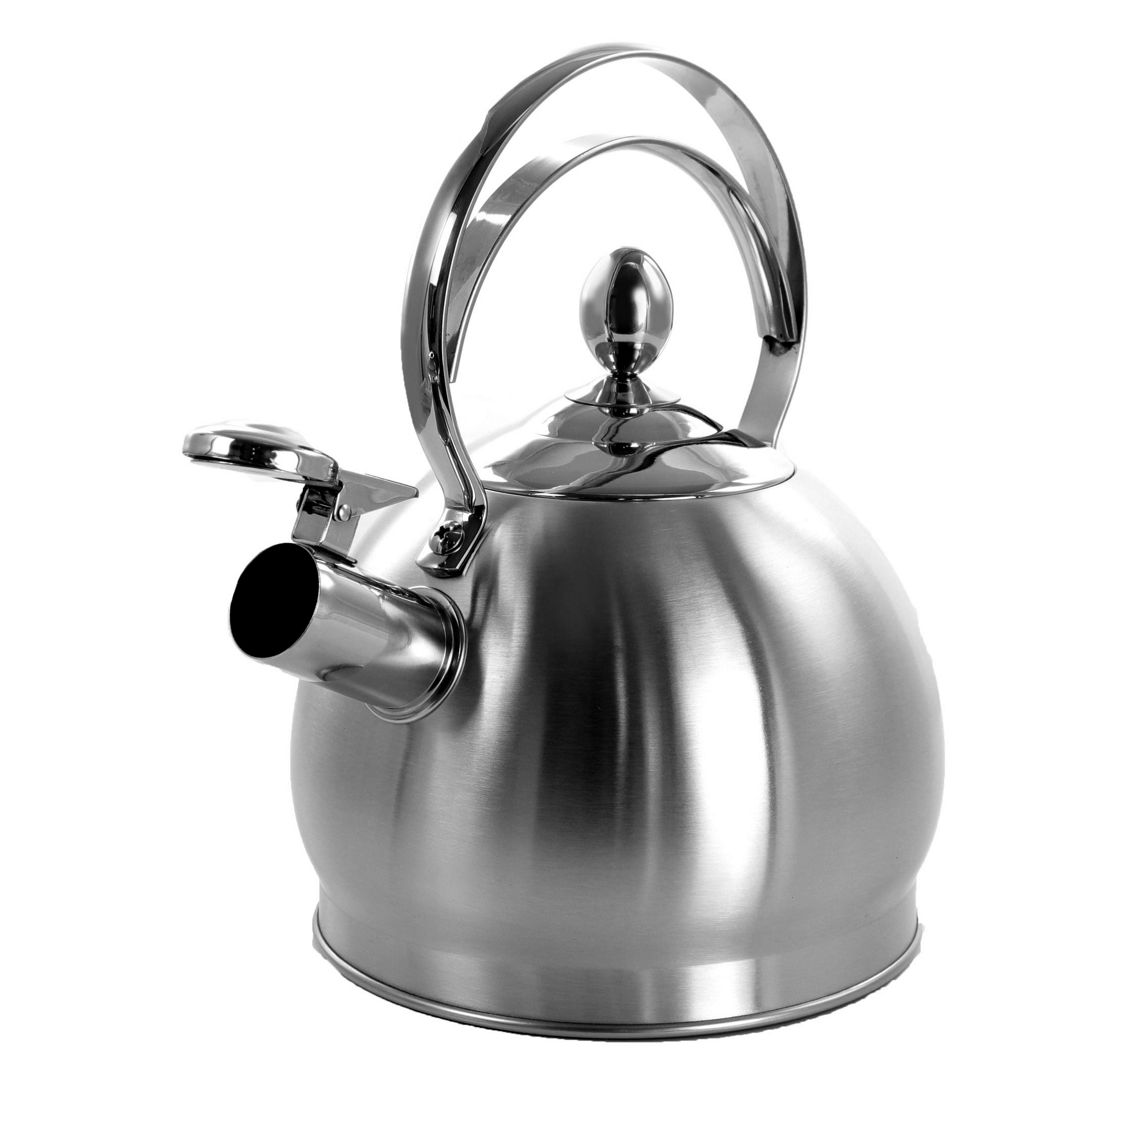 MegaChef 2.8 Liter Round Stovetop Whistling Kettle in Brushed Silver - Image 4 of 5